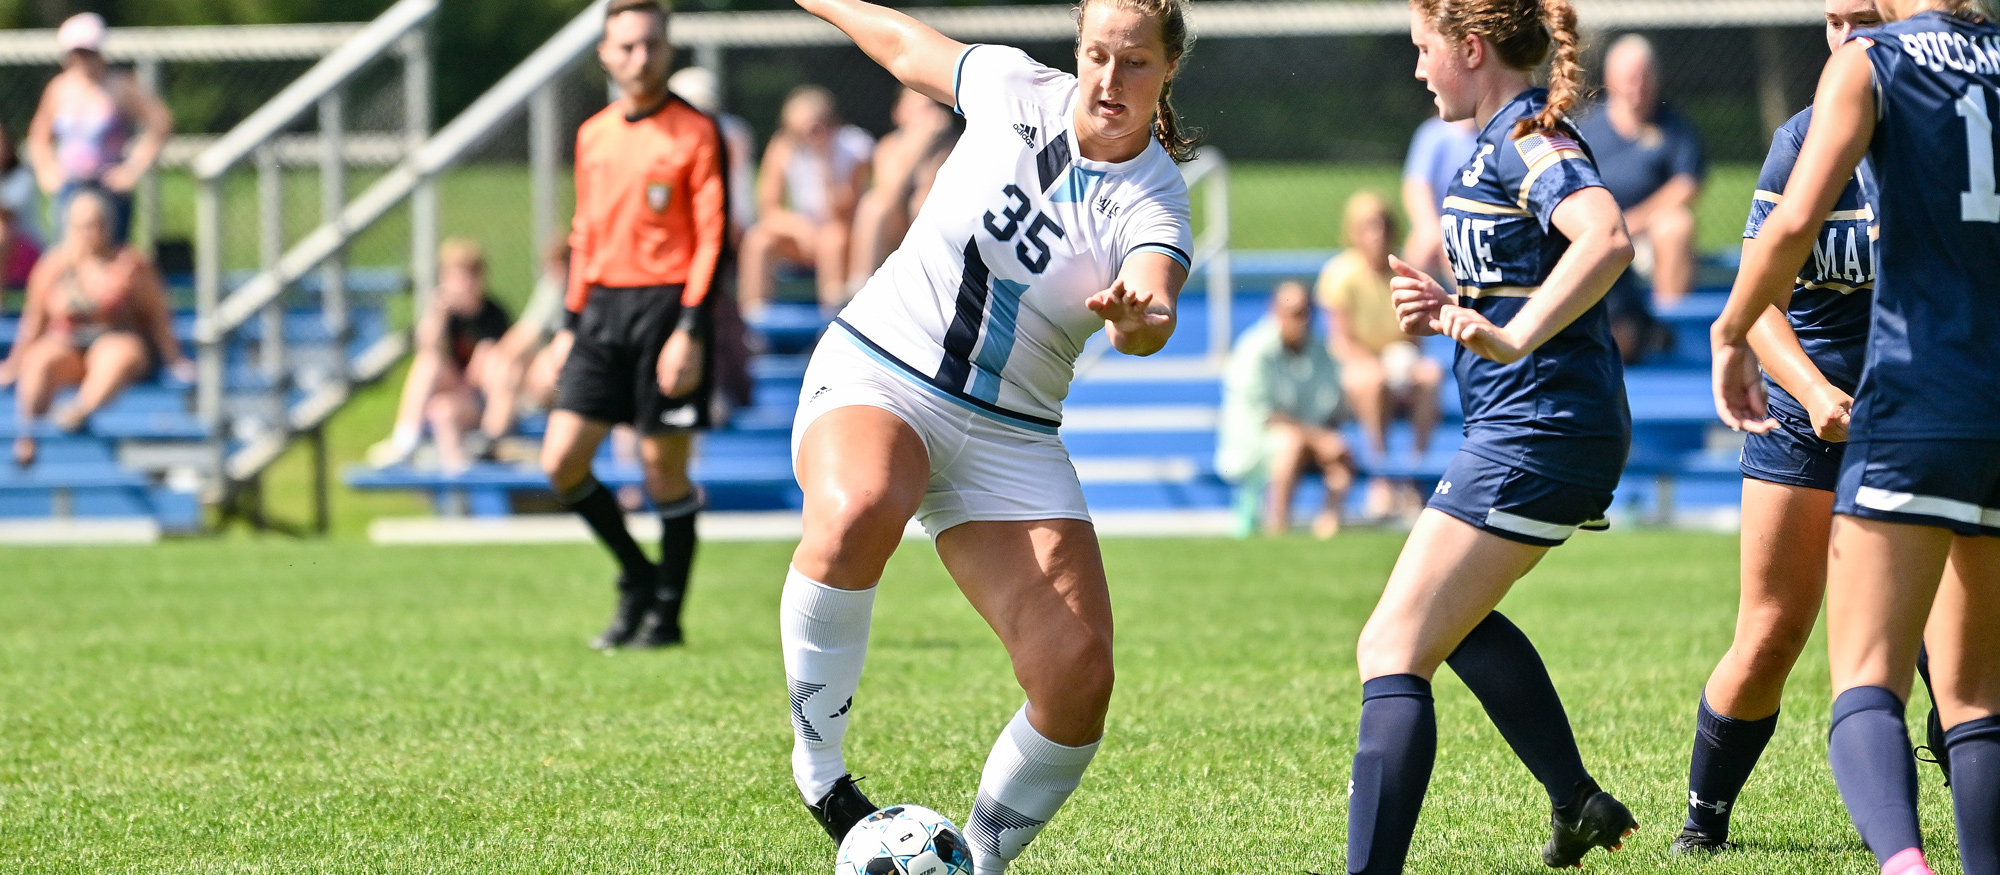 Taryn White netted her first collegiate goal in Mount Holyoke's 3-2 loss to Salve Regina on Sept. 30, 2023. (RJB Sports file photo)